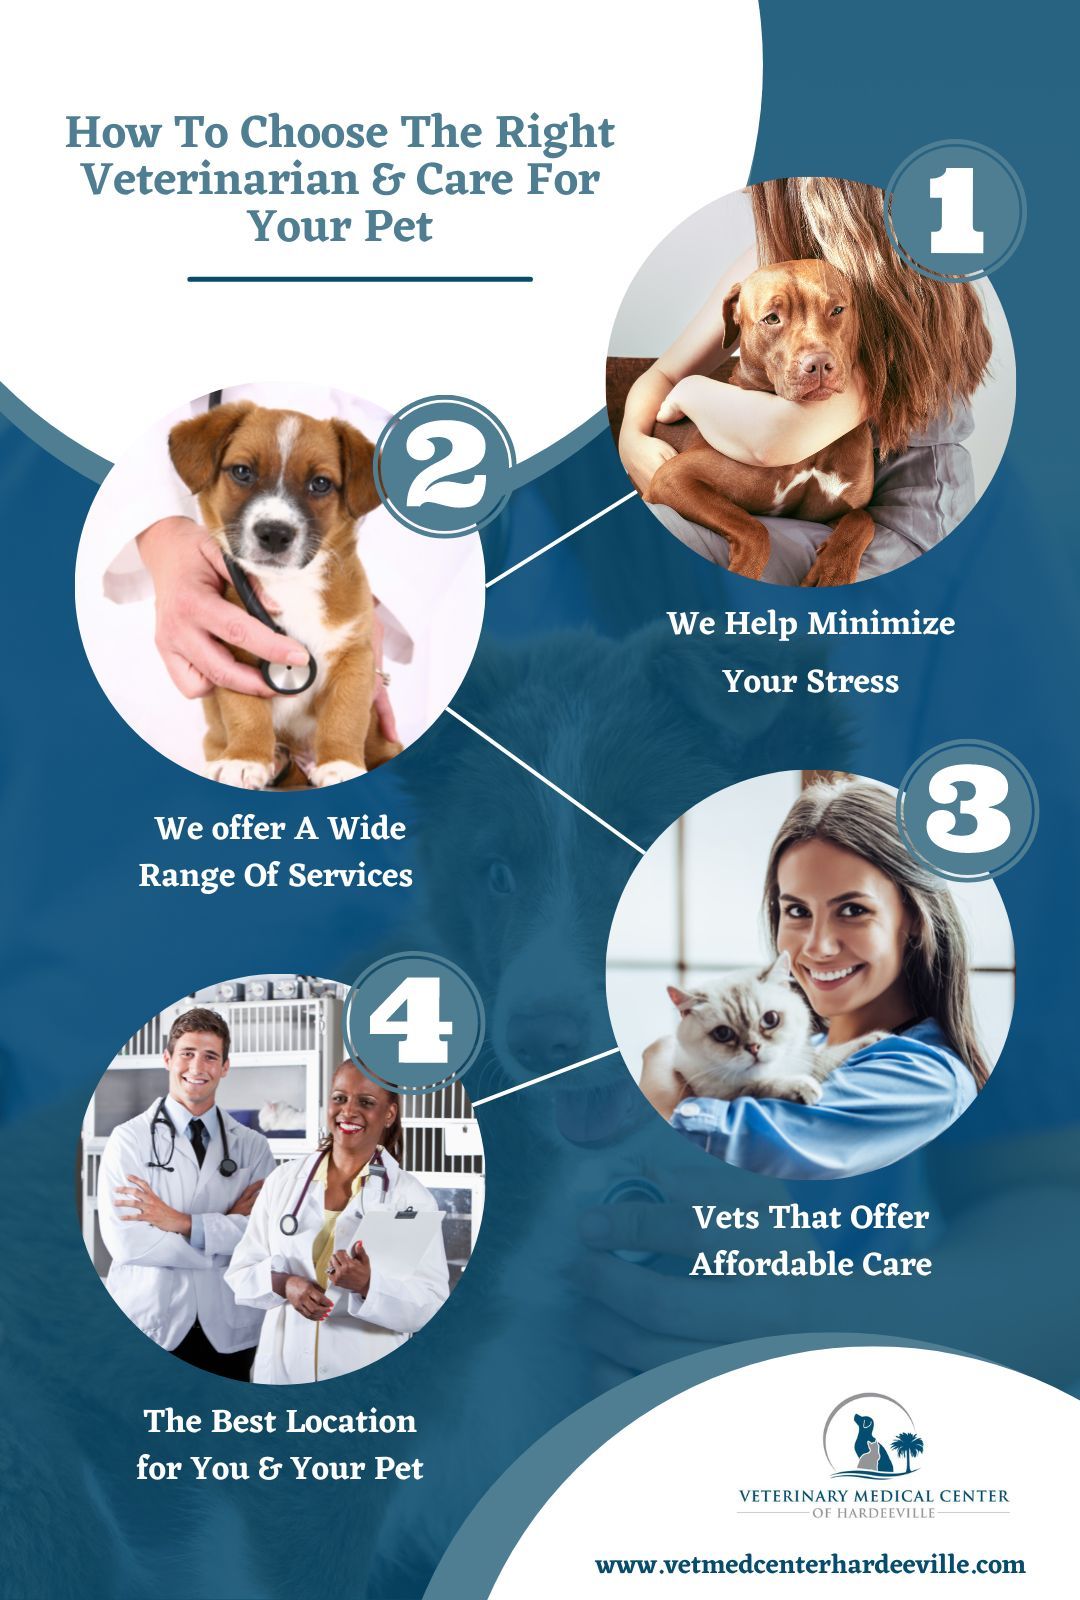 M32826   Infographic  How To Choose The Right Veterinarian & Care For Your Pet.jpg